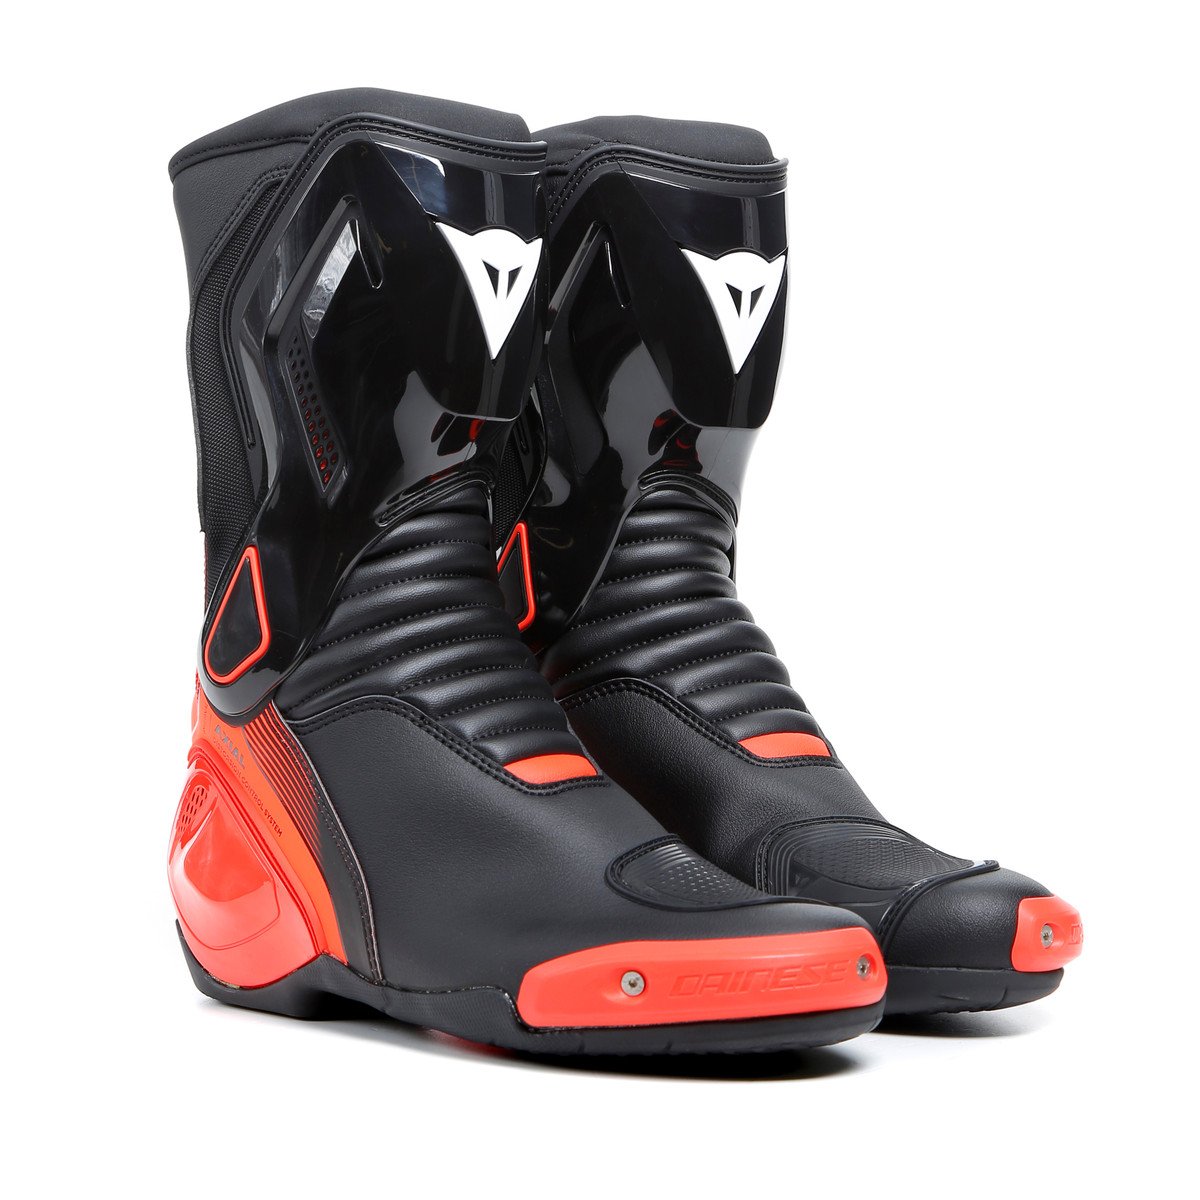 Image of Dainese Nexus 2 Boots Black Fluo Red Size 47 EN